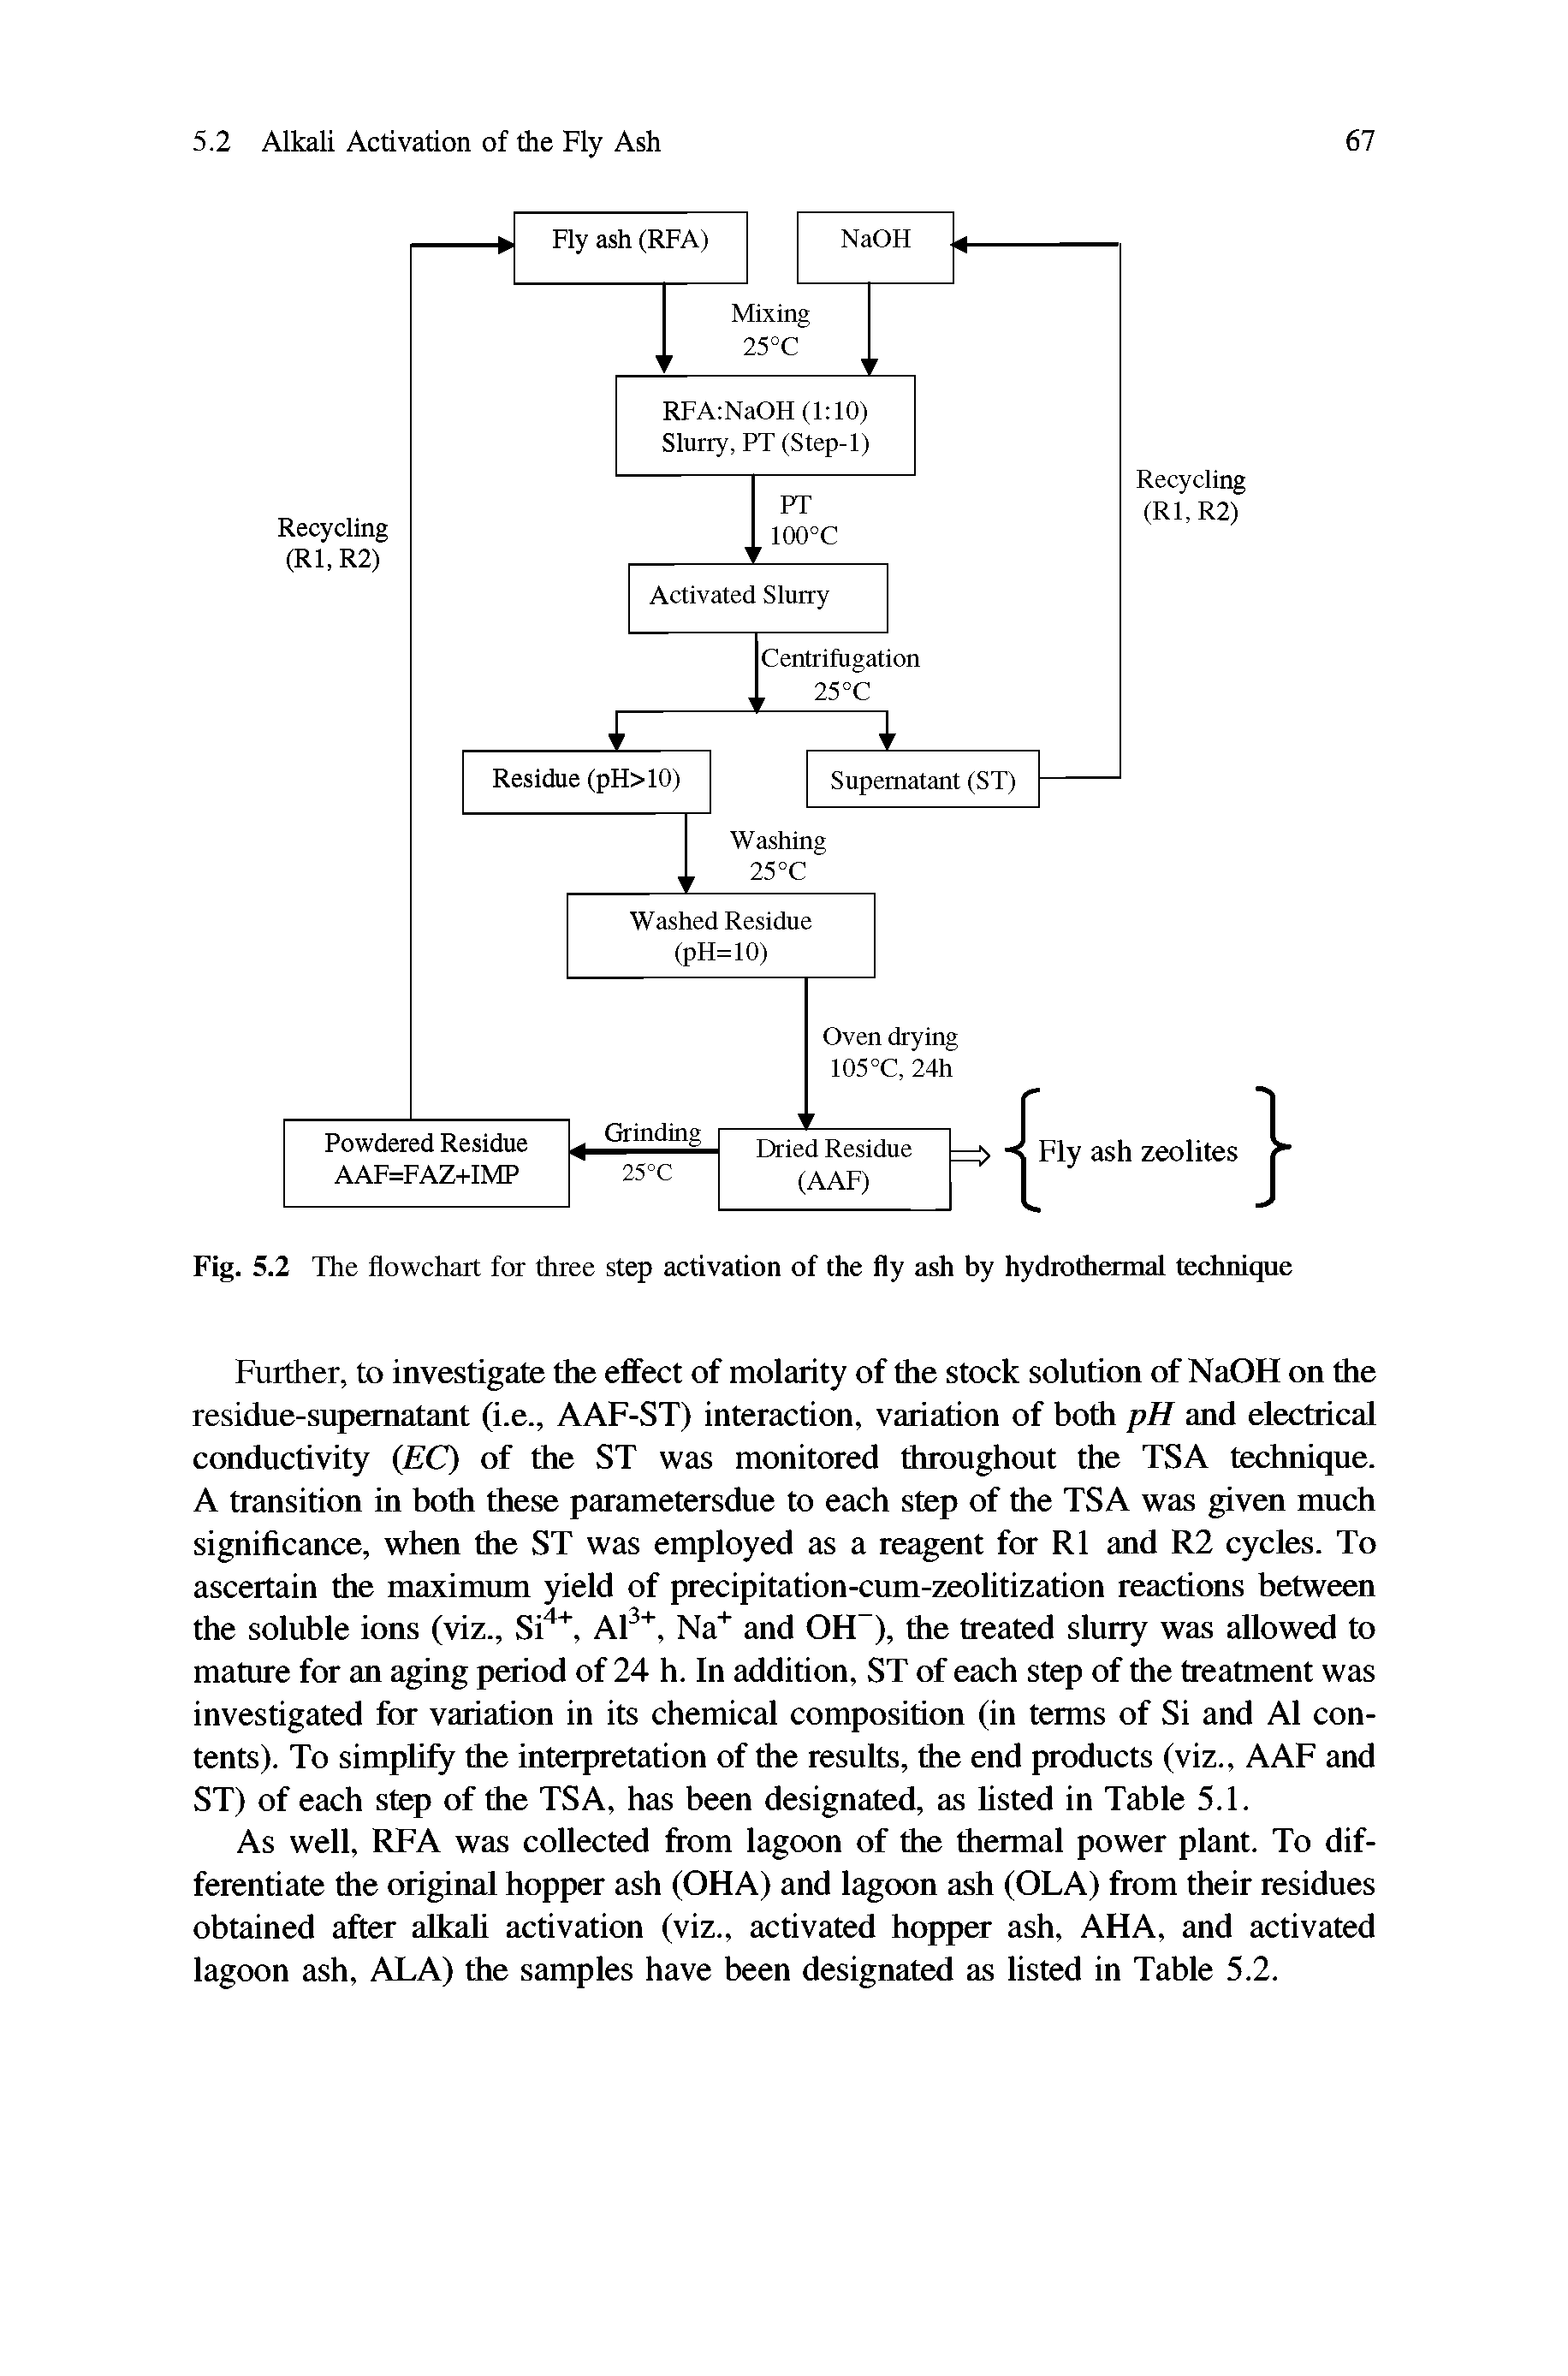 Fig. 5.2 The flowchart for three step activation of the fly ash by hydrothermal technique...